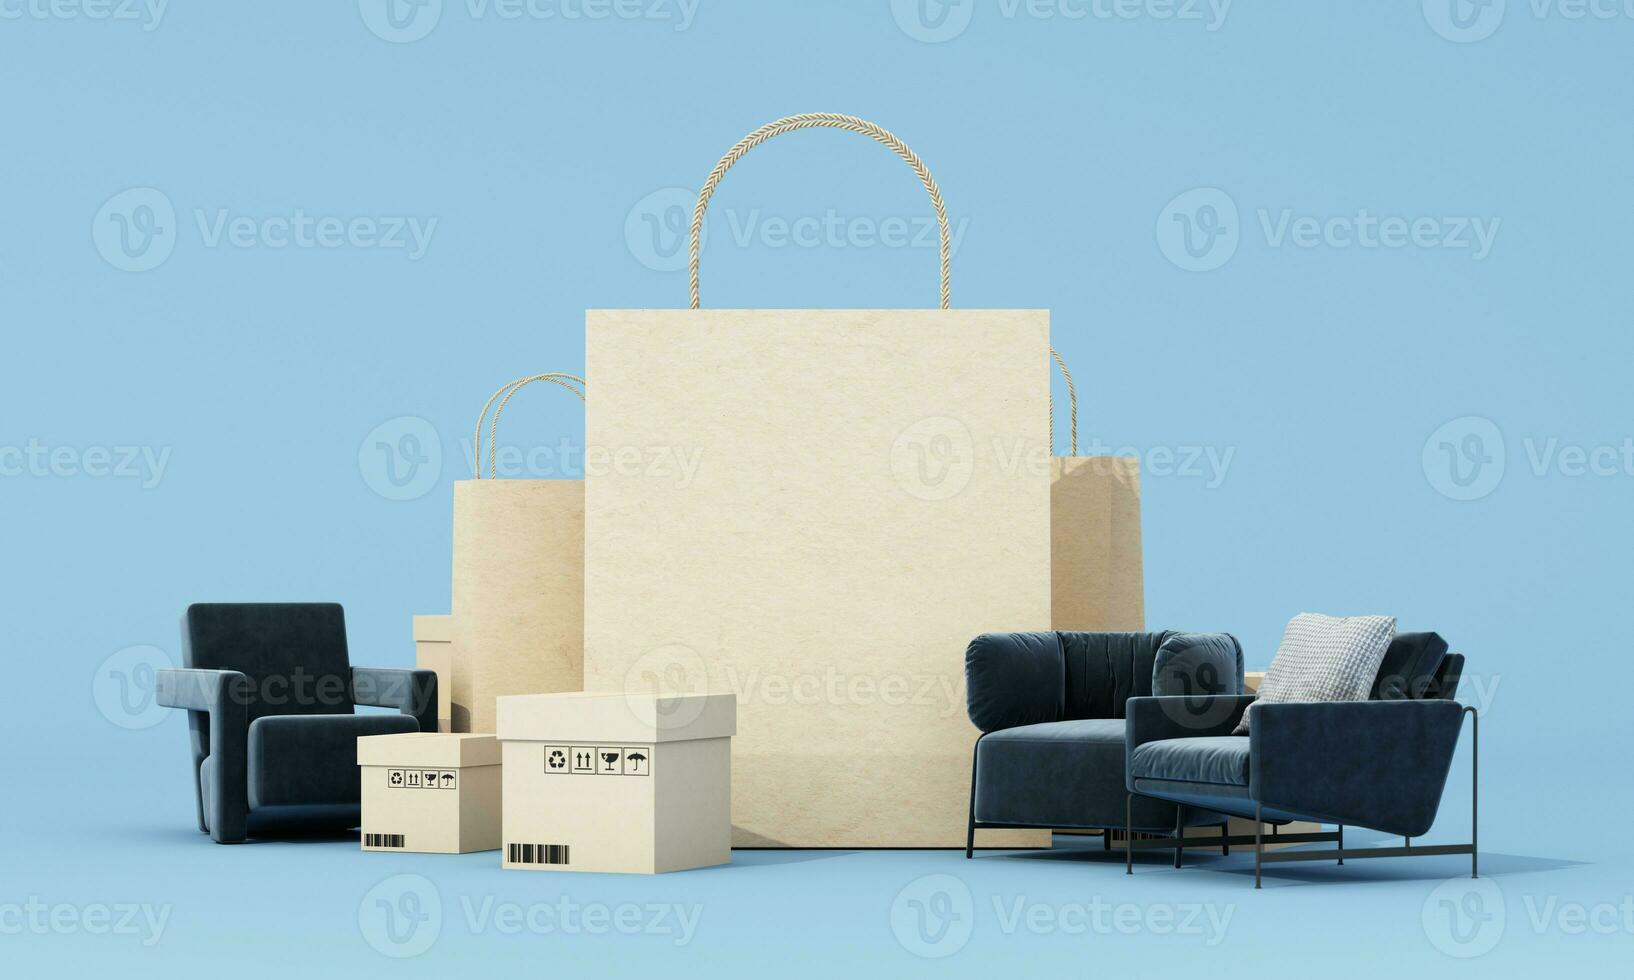 online shopping concept furniture surrounded by sofas, armchairs and fabric chairs, promotion sales for furniture, with shopping bag and shipping box on pastel background. 3d rendering photo